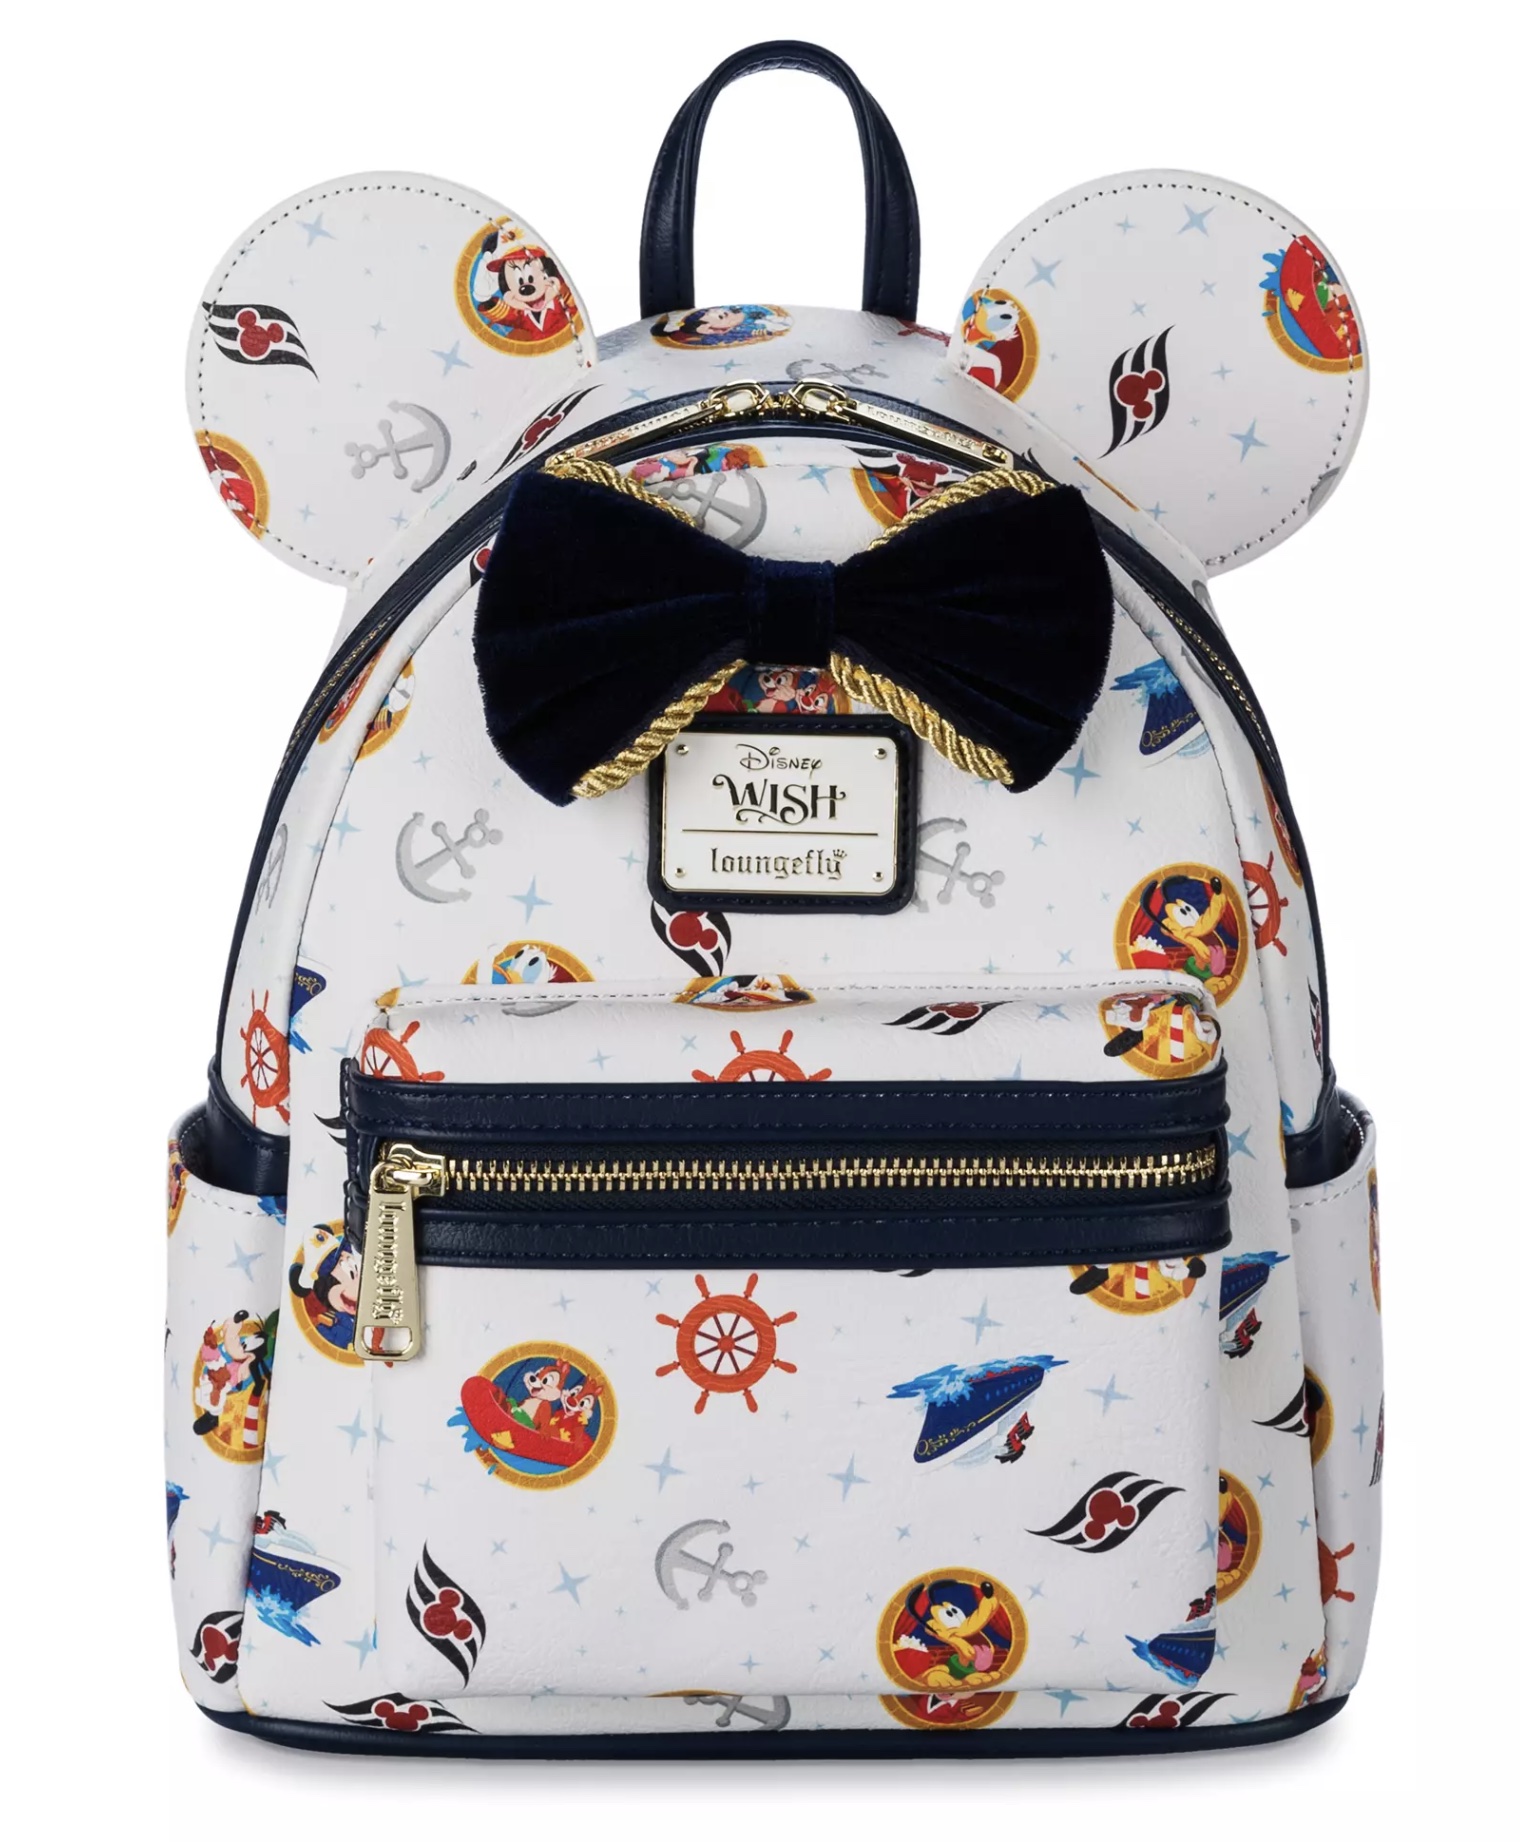 2022-dcl-disney-cruise-line-wish-merch-dooney-and-bourke-bags